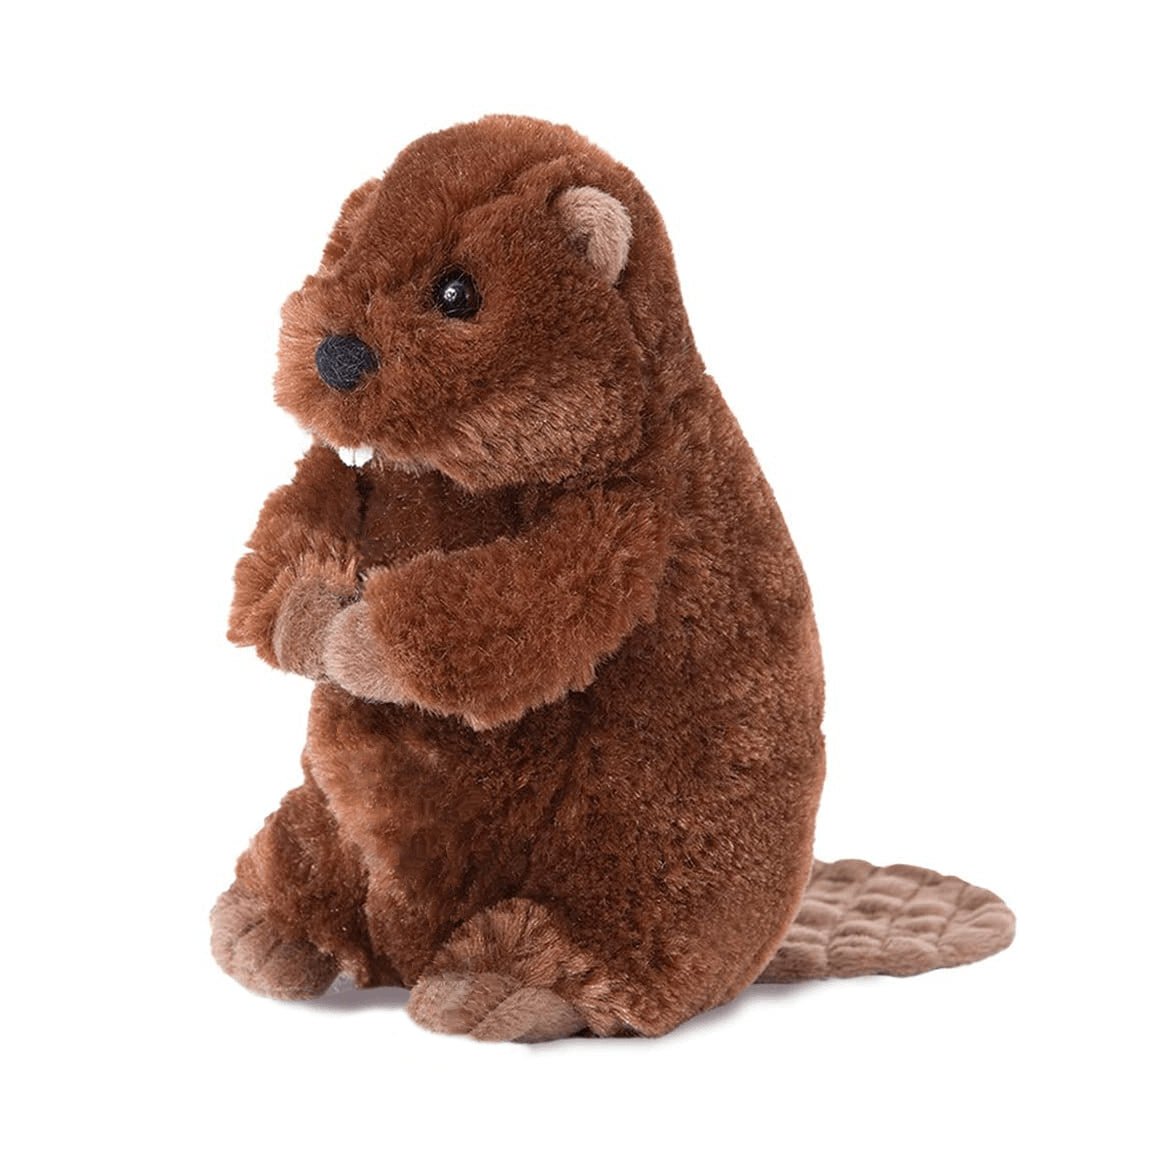 A Buddy Beaver stuffed animal with buckteeth is sitting on a white background.